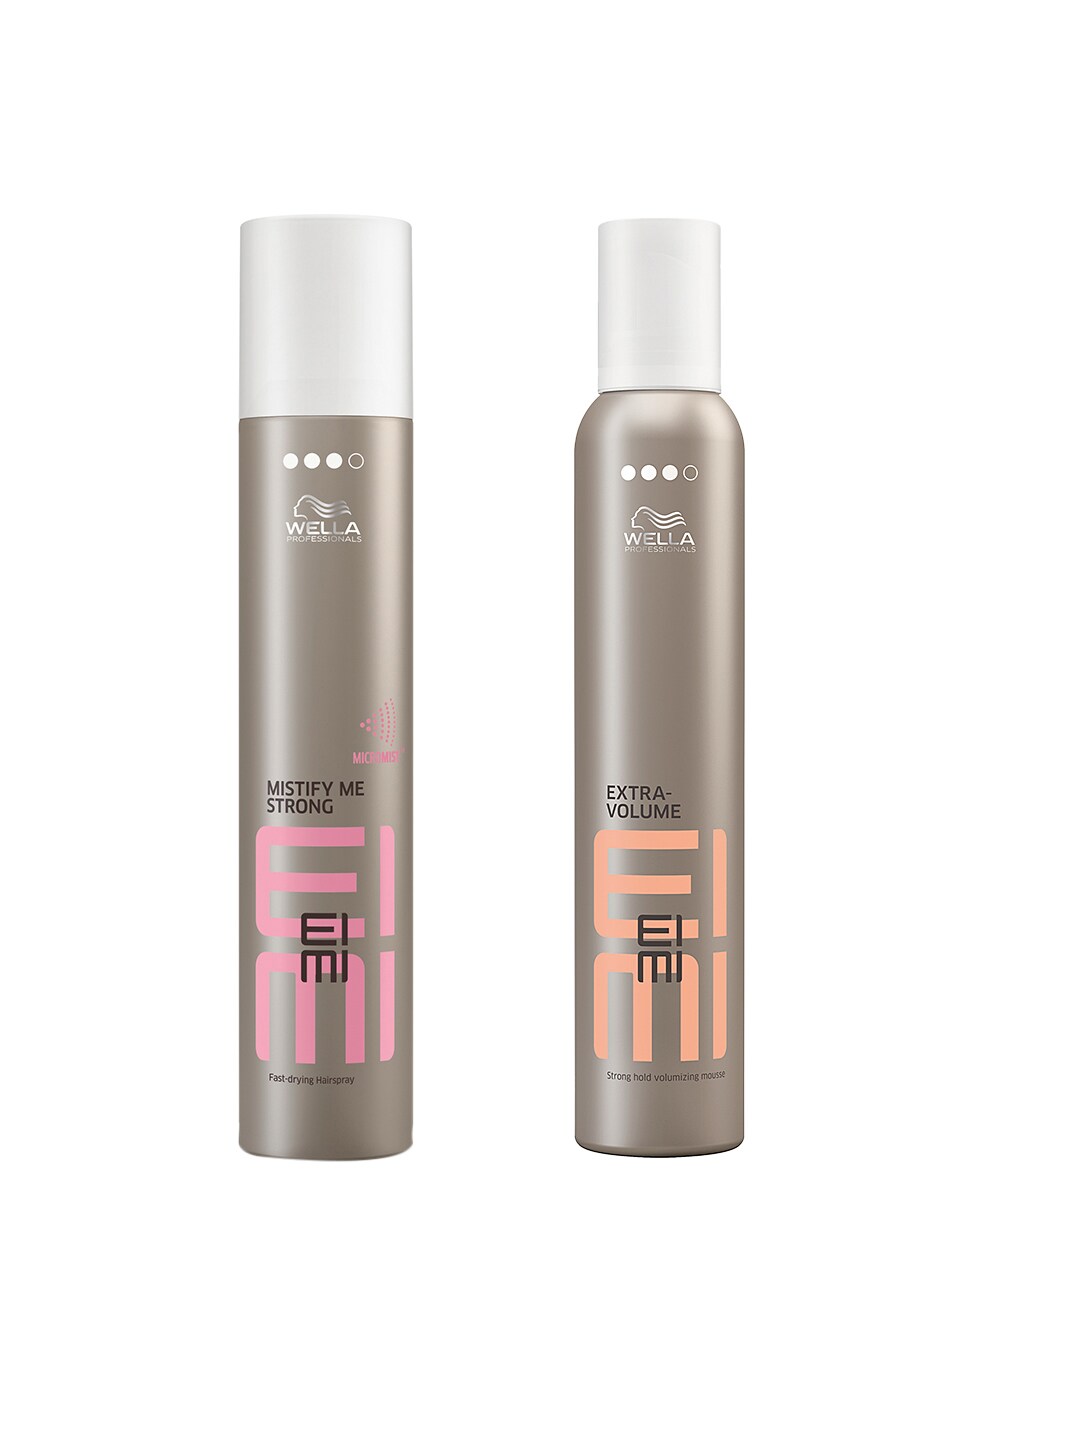 WELLA PROFESSIONALS Set of EIMI Finishing Hair Spray & Extra-Volume Hair  Mousse Price in India, Full Specifications & Offers 